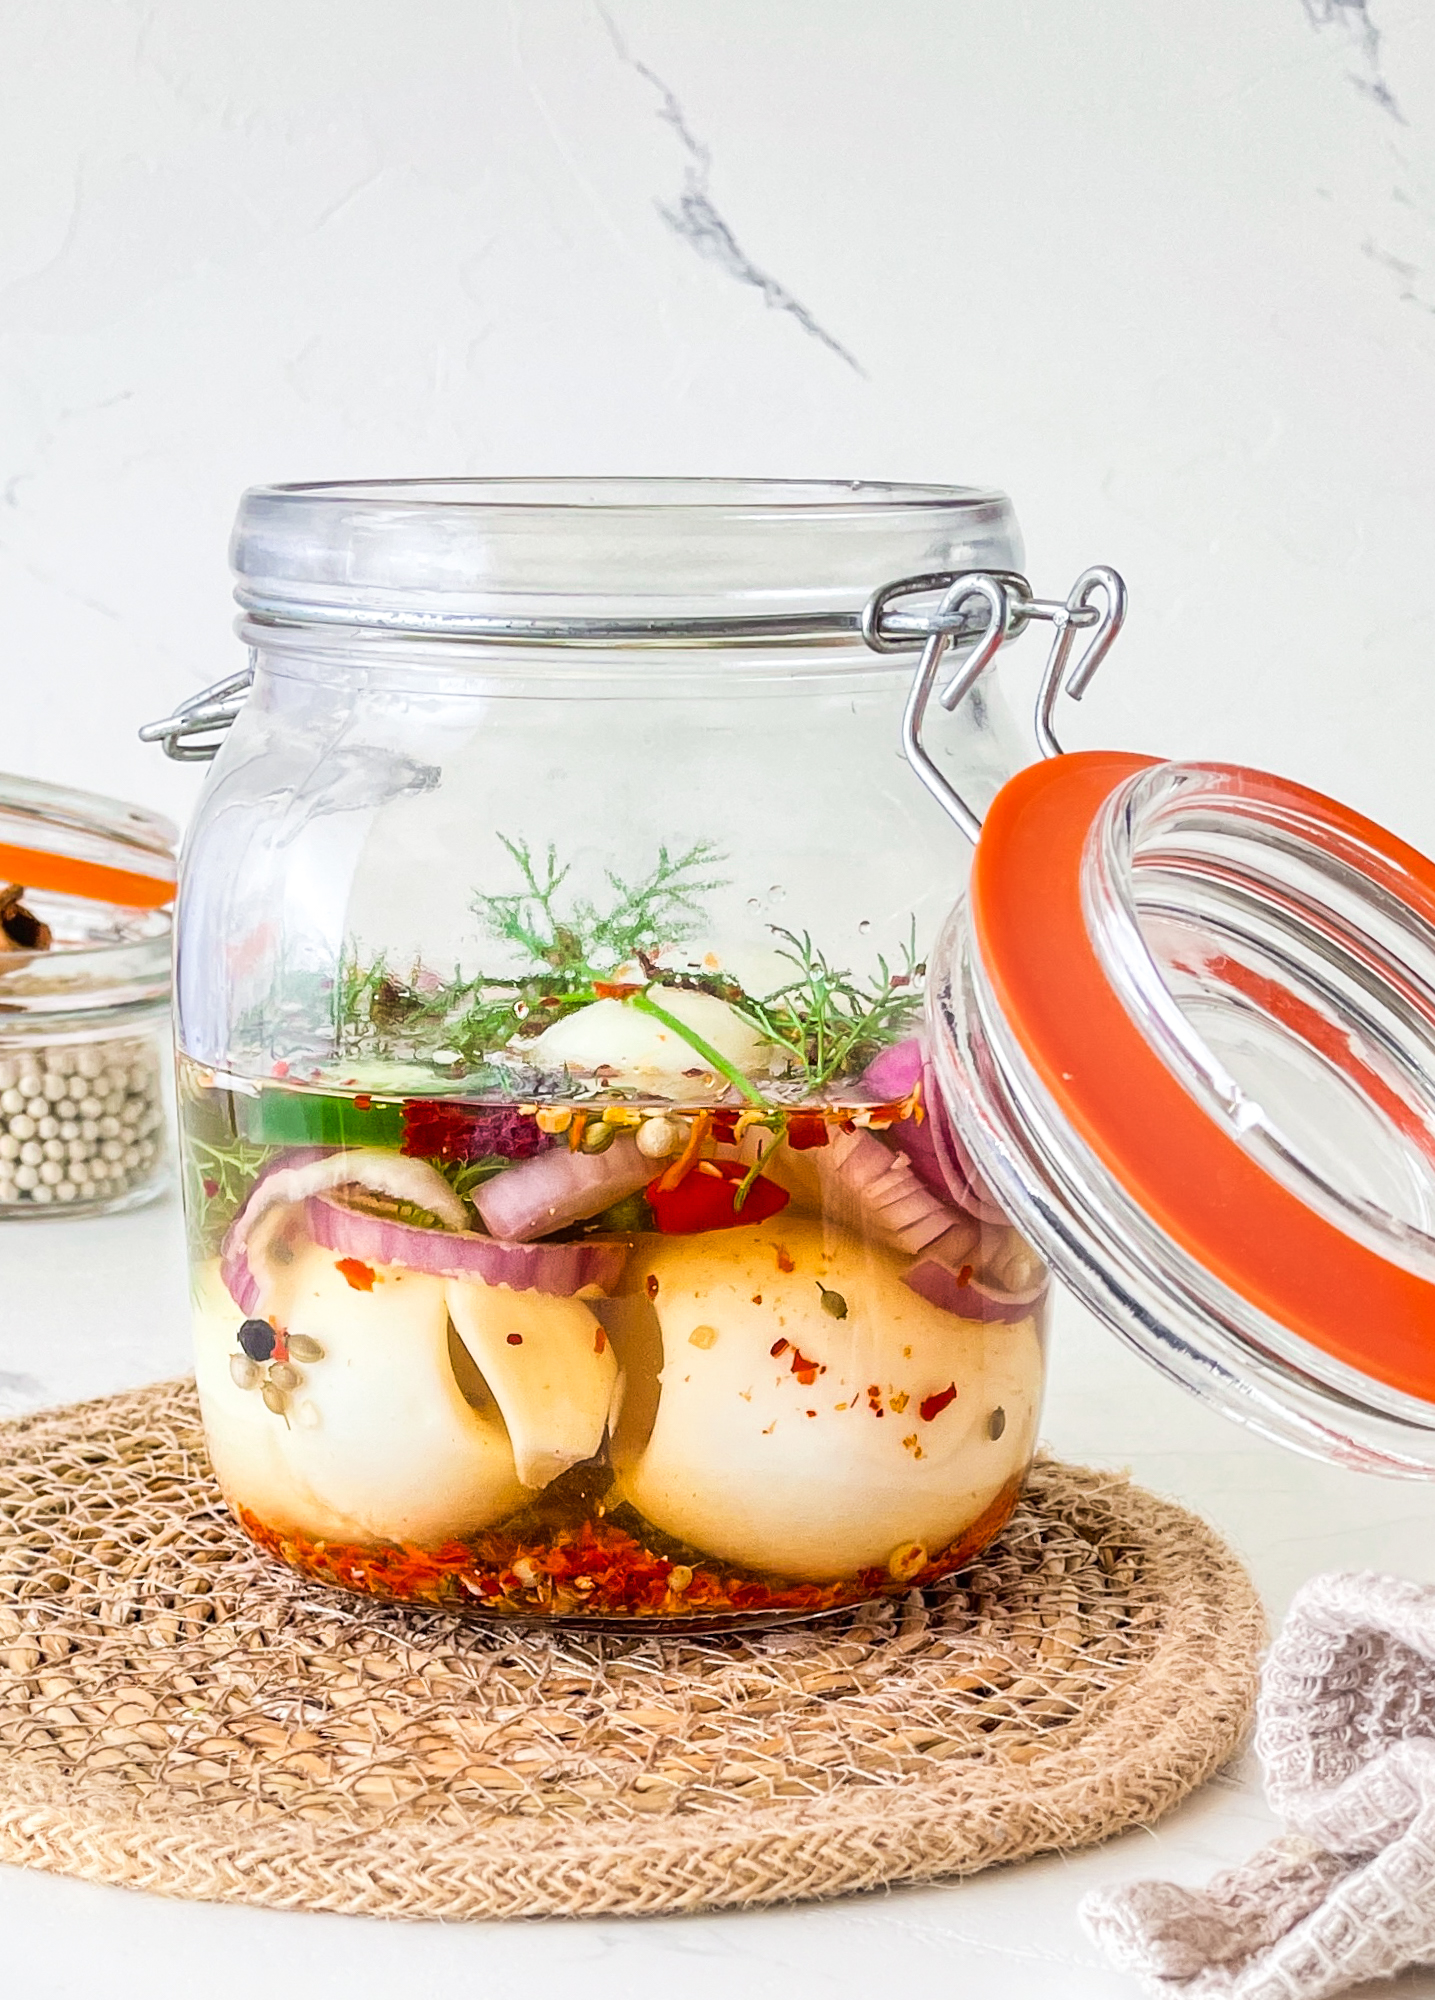 Pickled eggs in a jar with green herbs and red chilis.